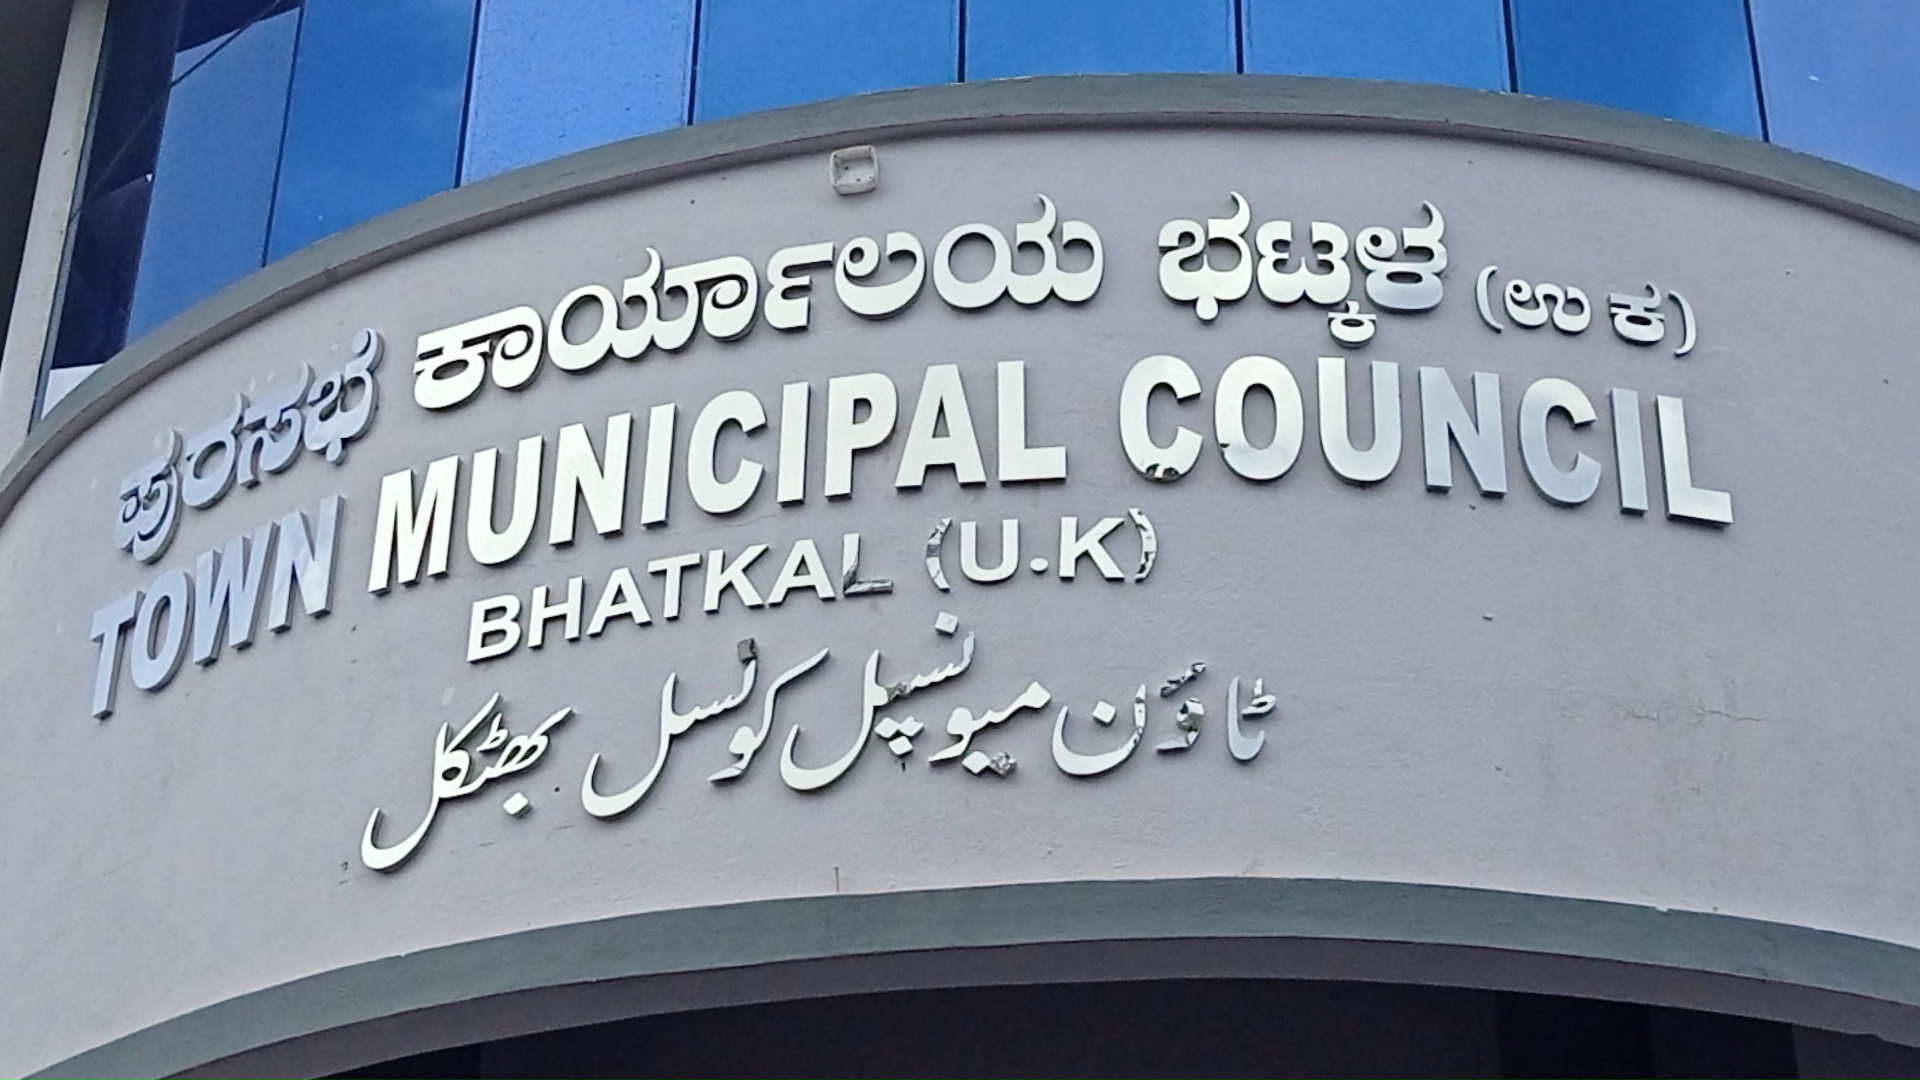 Controversy in Bhatkal over name of Municipal building in Urdu, DC to meet officials on Thursday